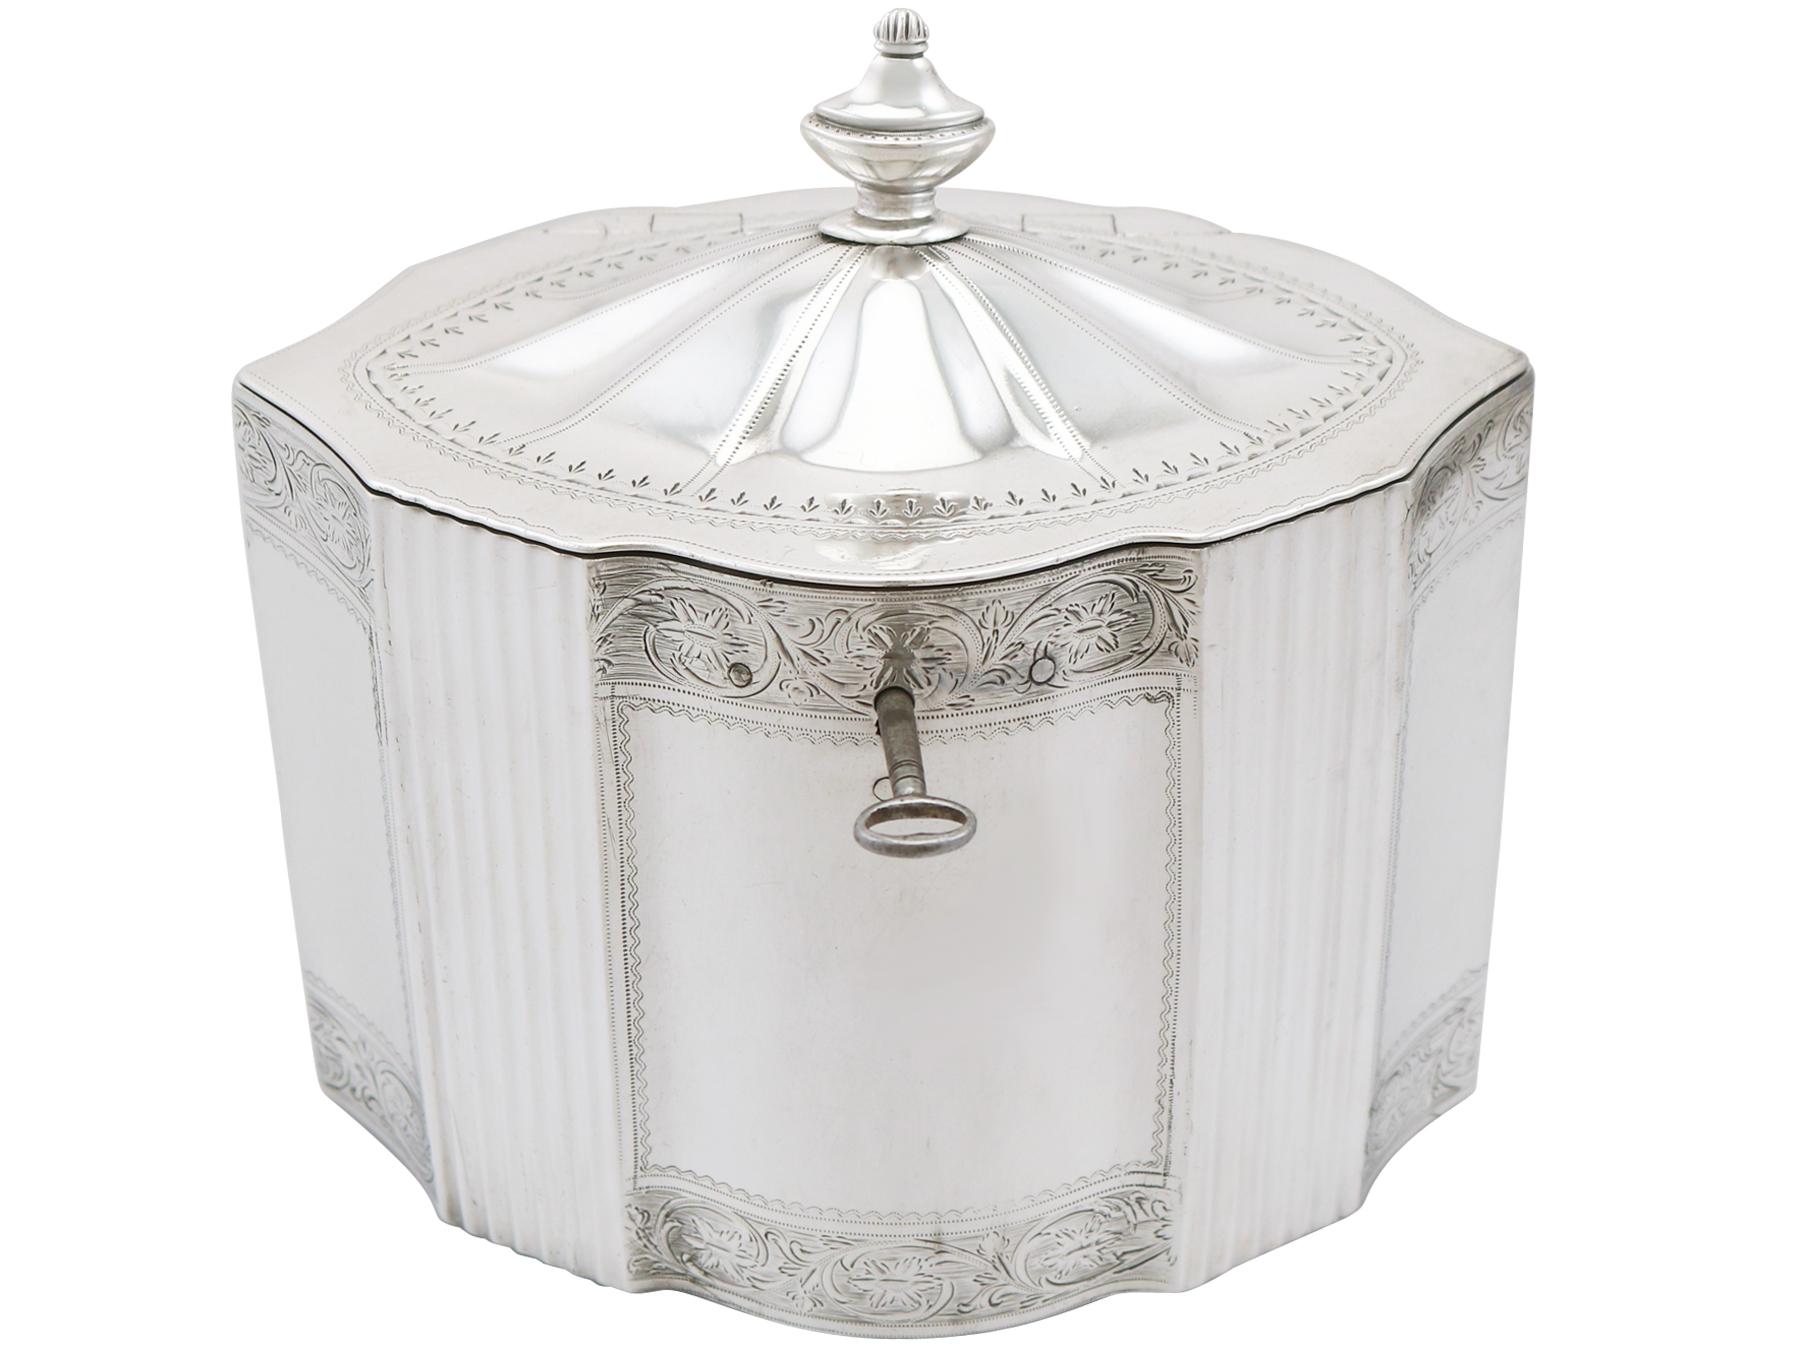 An exceptional, fine and impressive antique Georgian English sterling silver locking tea caddy; an addition to our silver teaware collection.

This exceptional antique George III sterling silver locking tea caddy has a navette, paneled shaped